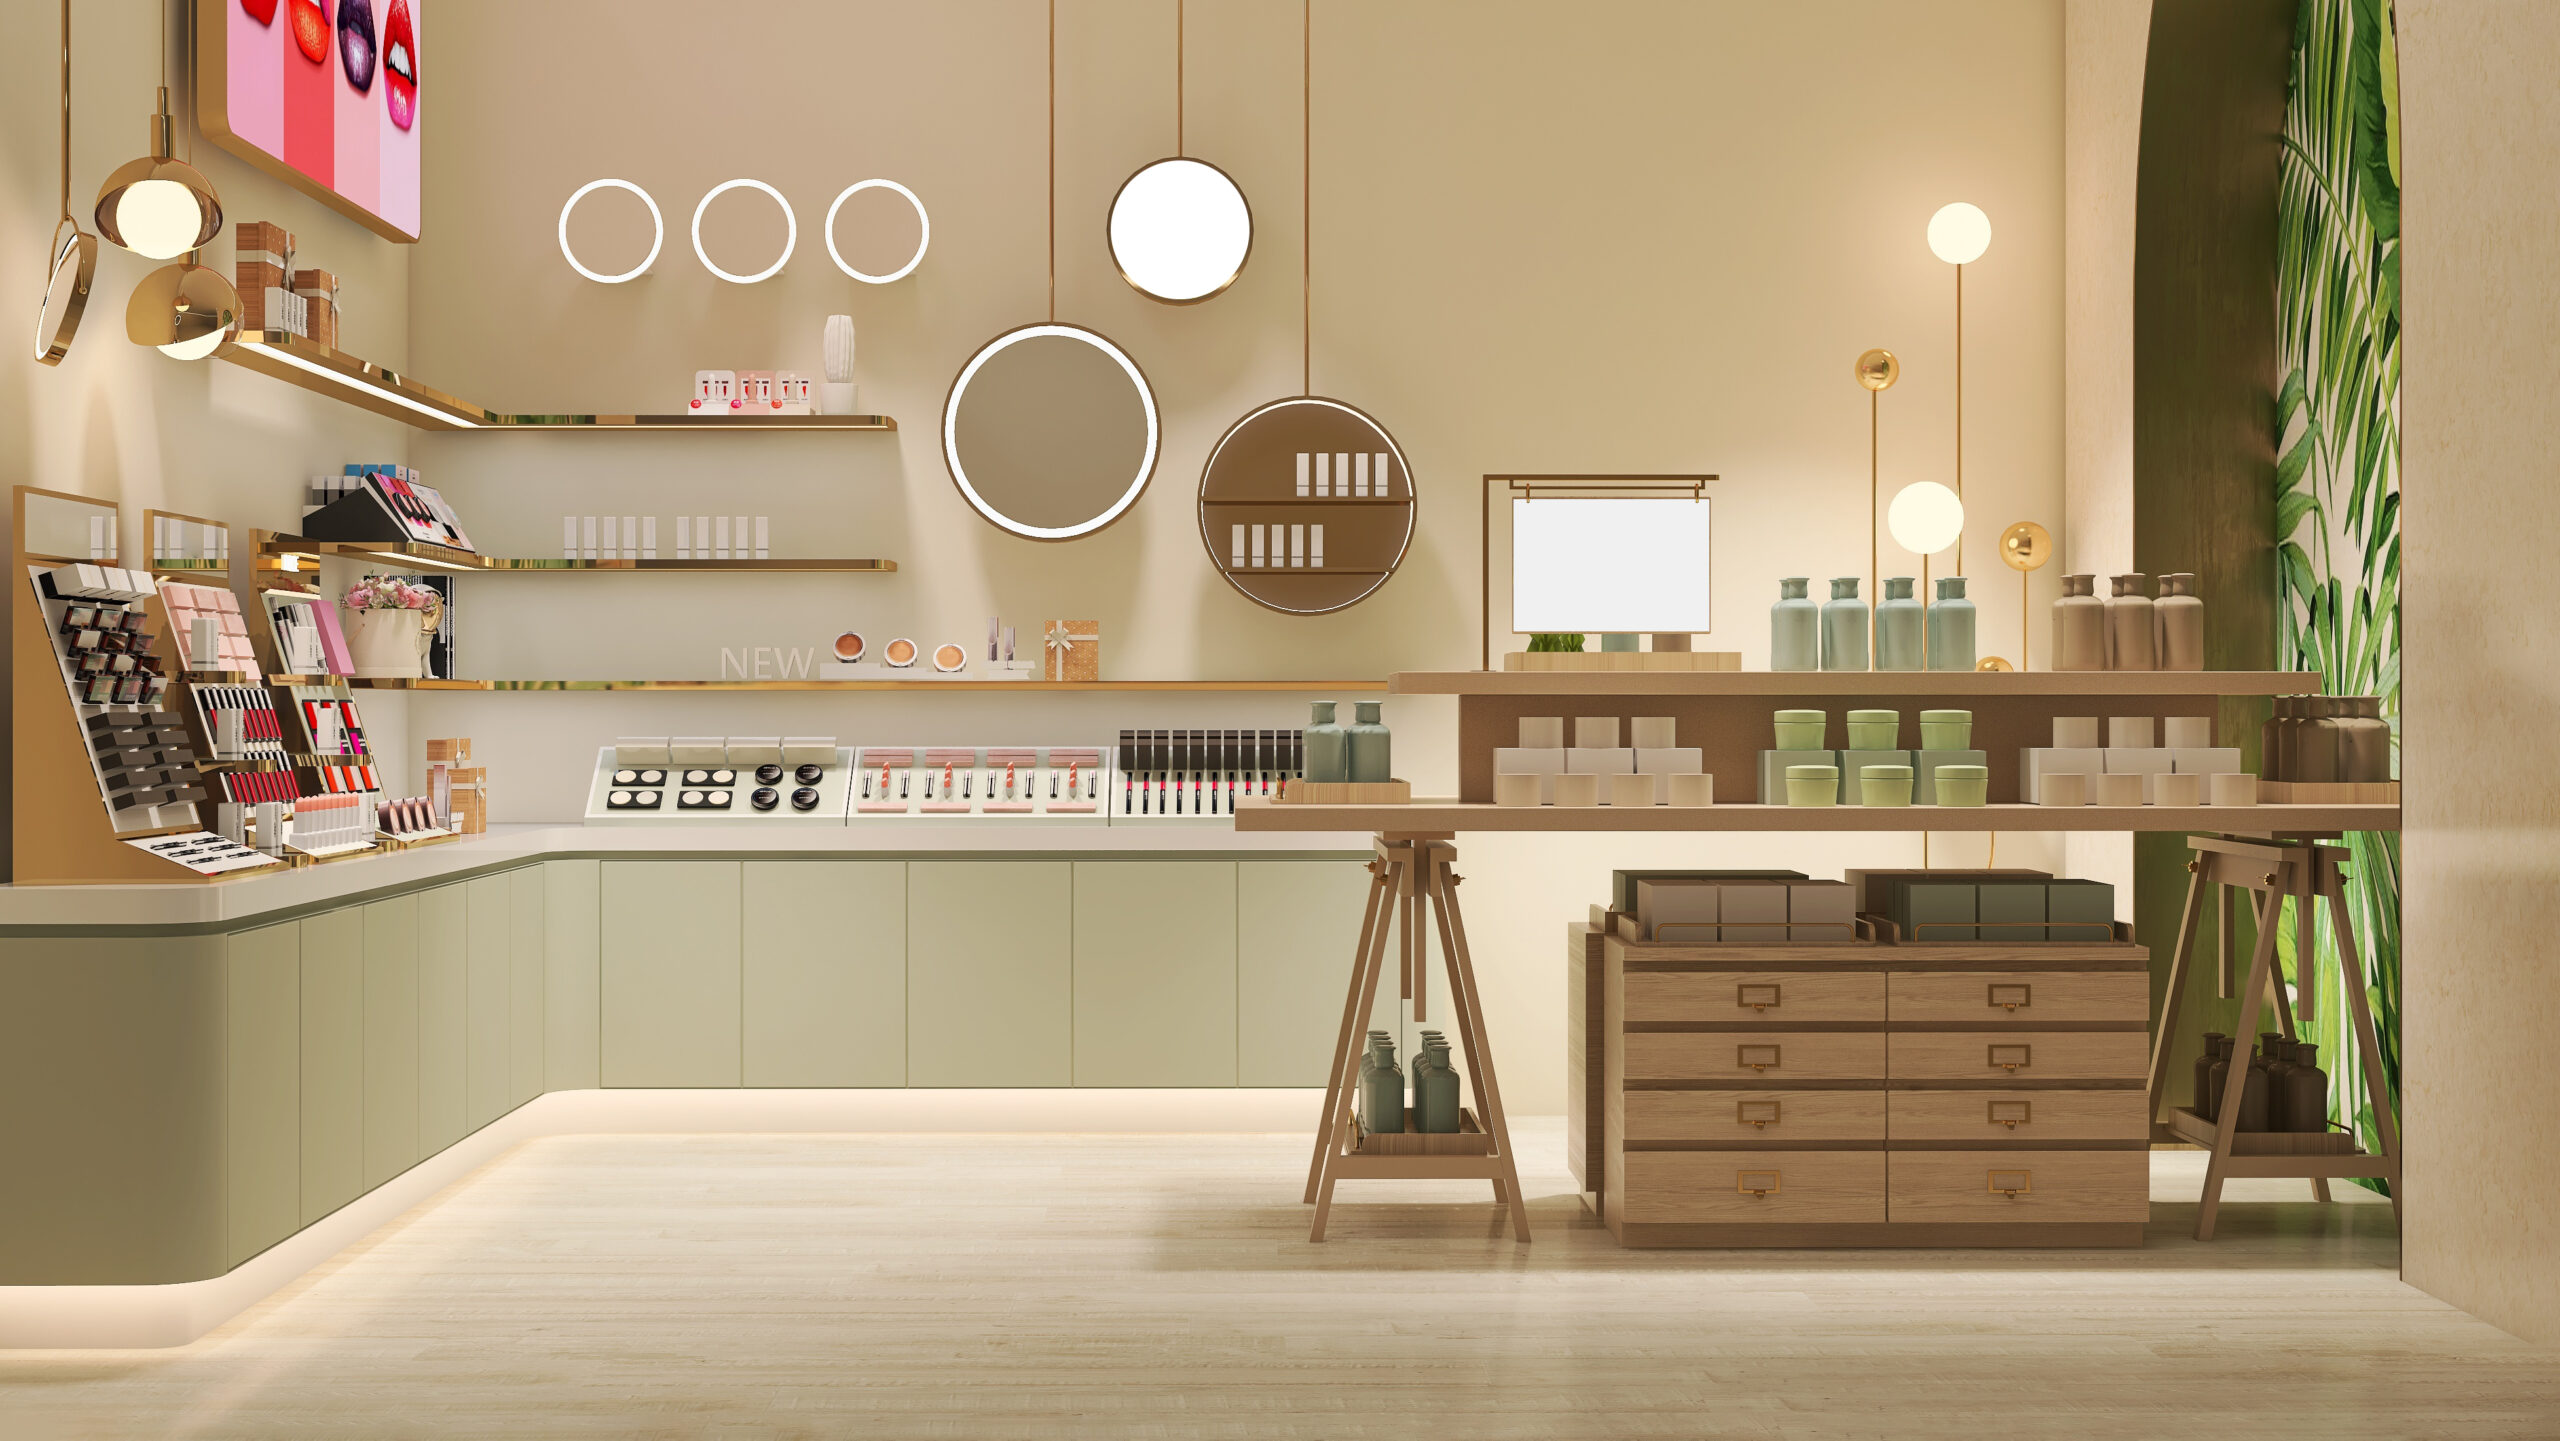 Interior of a beauty retail brick and mortar store with elegant product display.